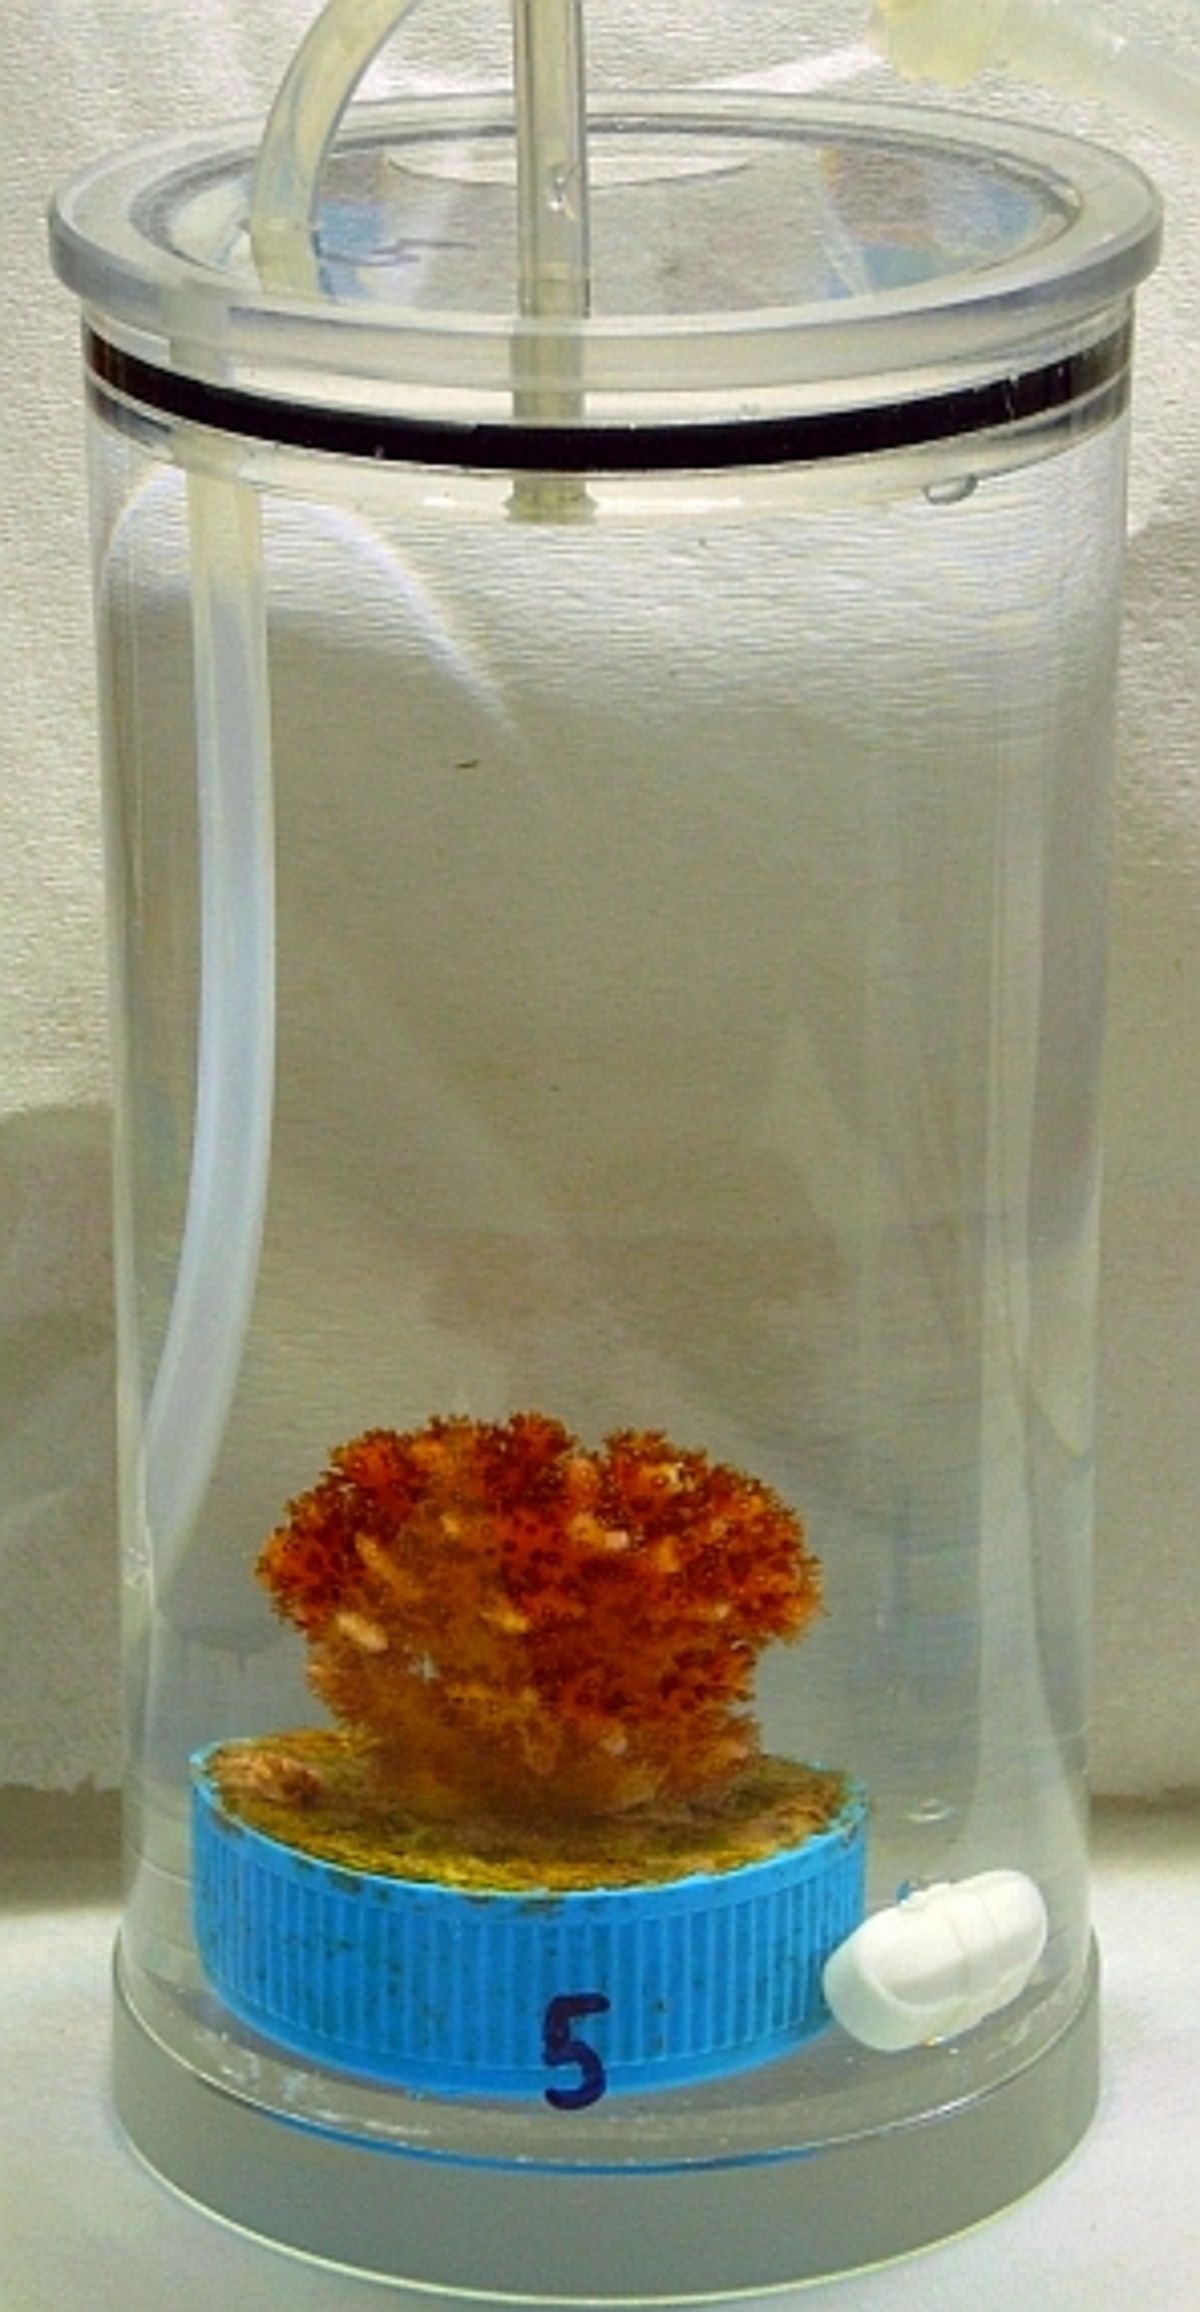 Culturing <EM>Pocillopora</EM> sp. in the culturing facilities in the Hebrew University of Jerusalem (image by Isabelle Taubner, GEOMAR).